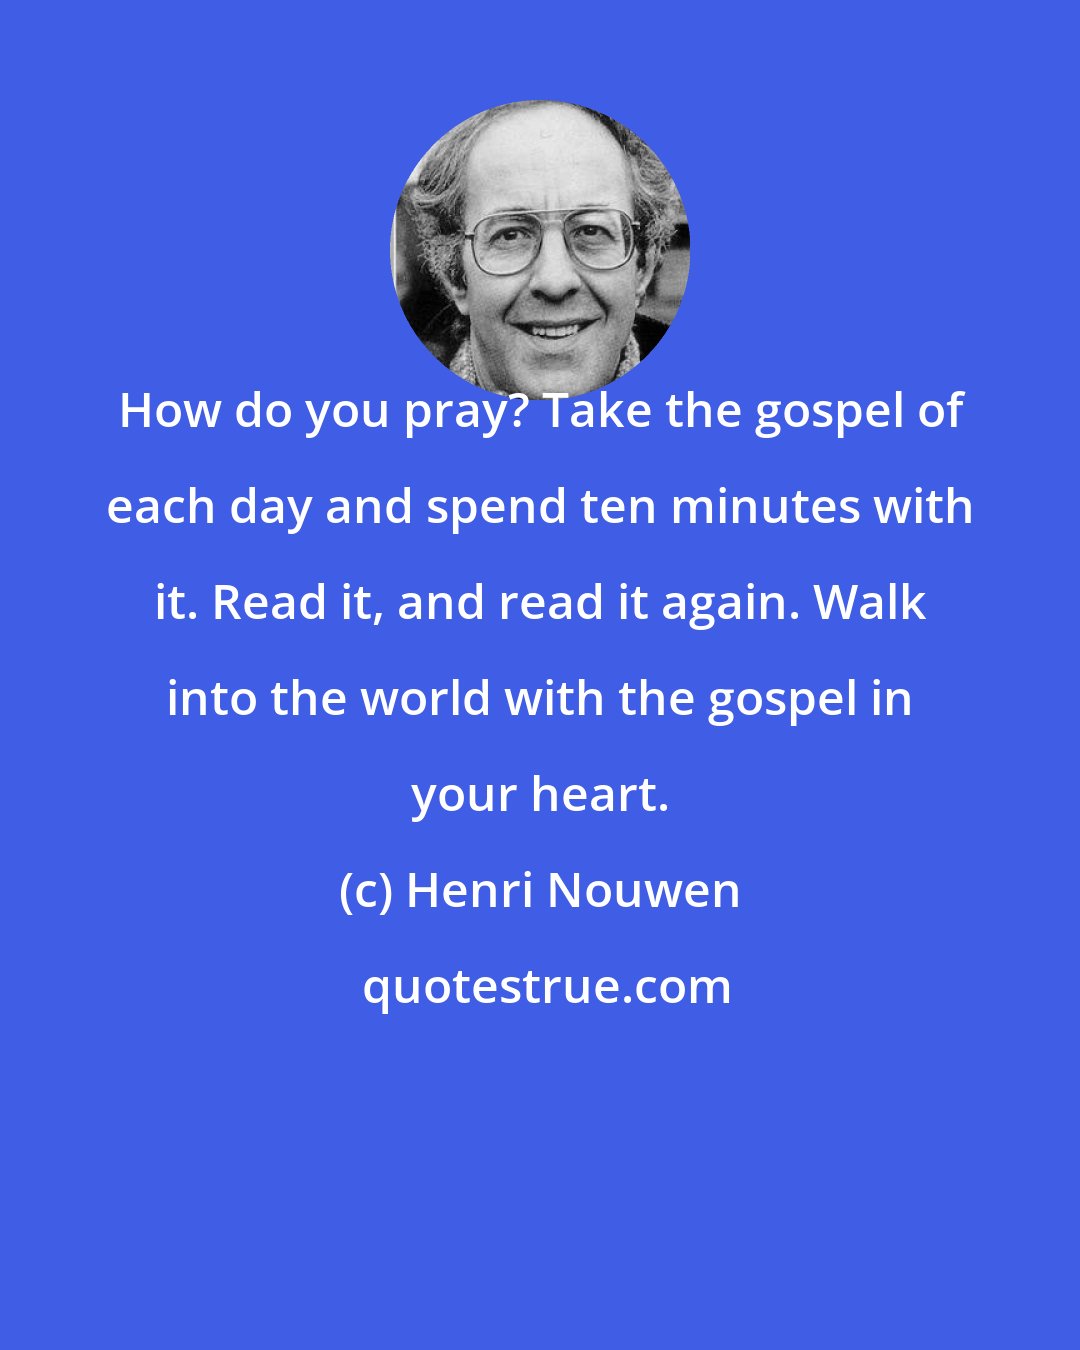 Henri Nouwen: How do you pray? Take the gospel of each day and spend ten minutes with it. Read it, and read it again. Walk into the world with the gospel in your heart.